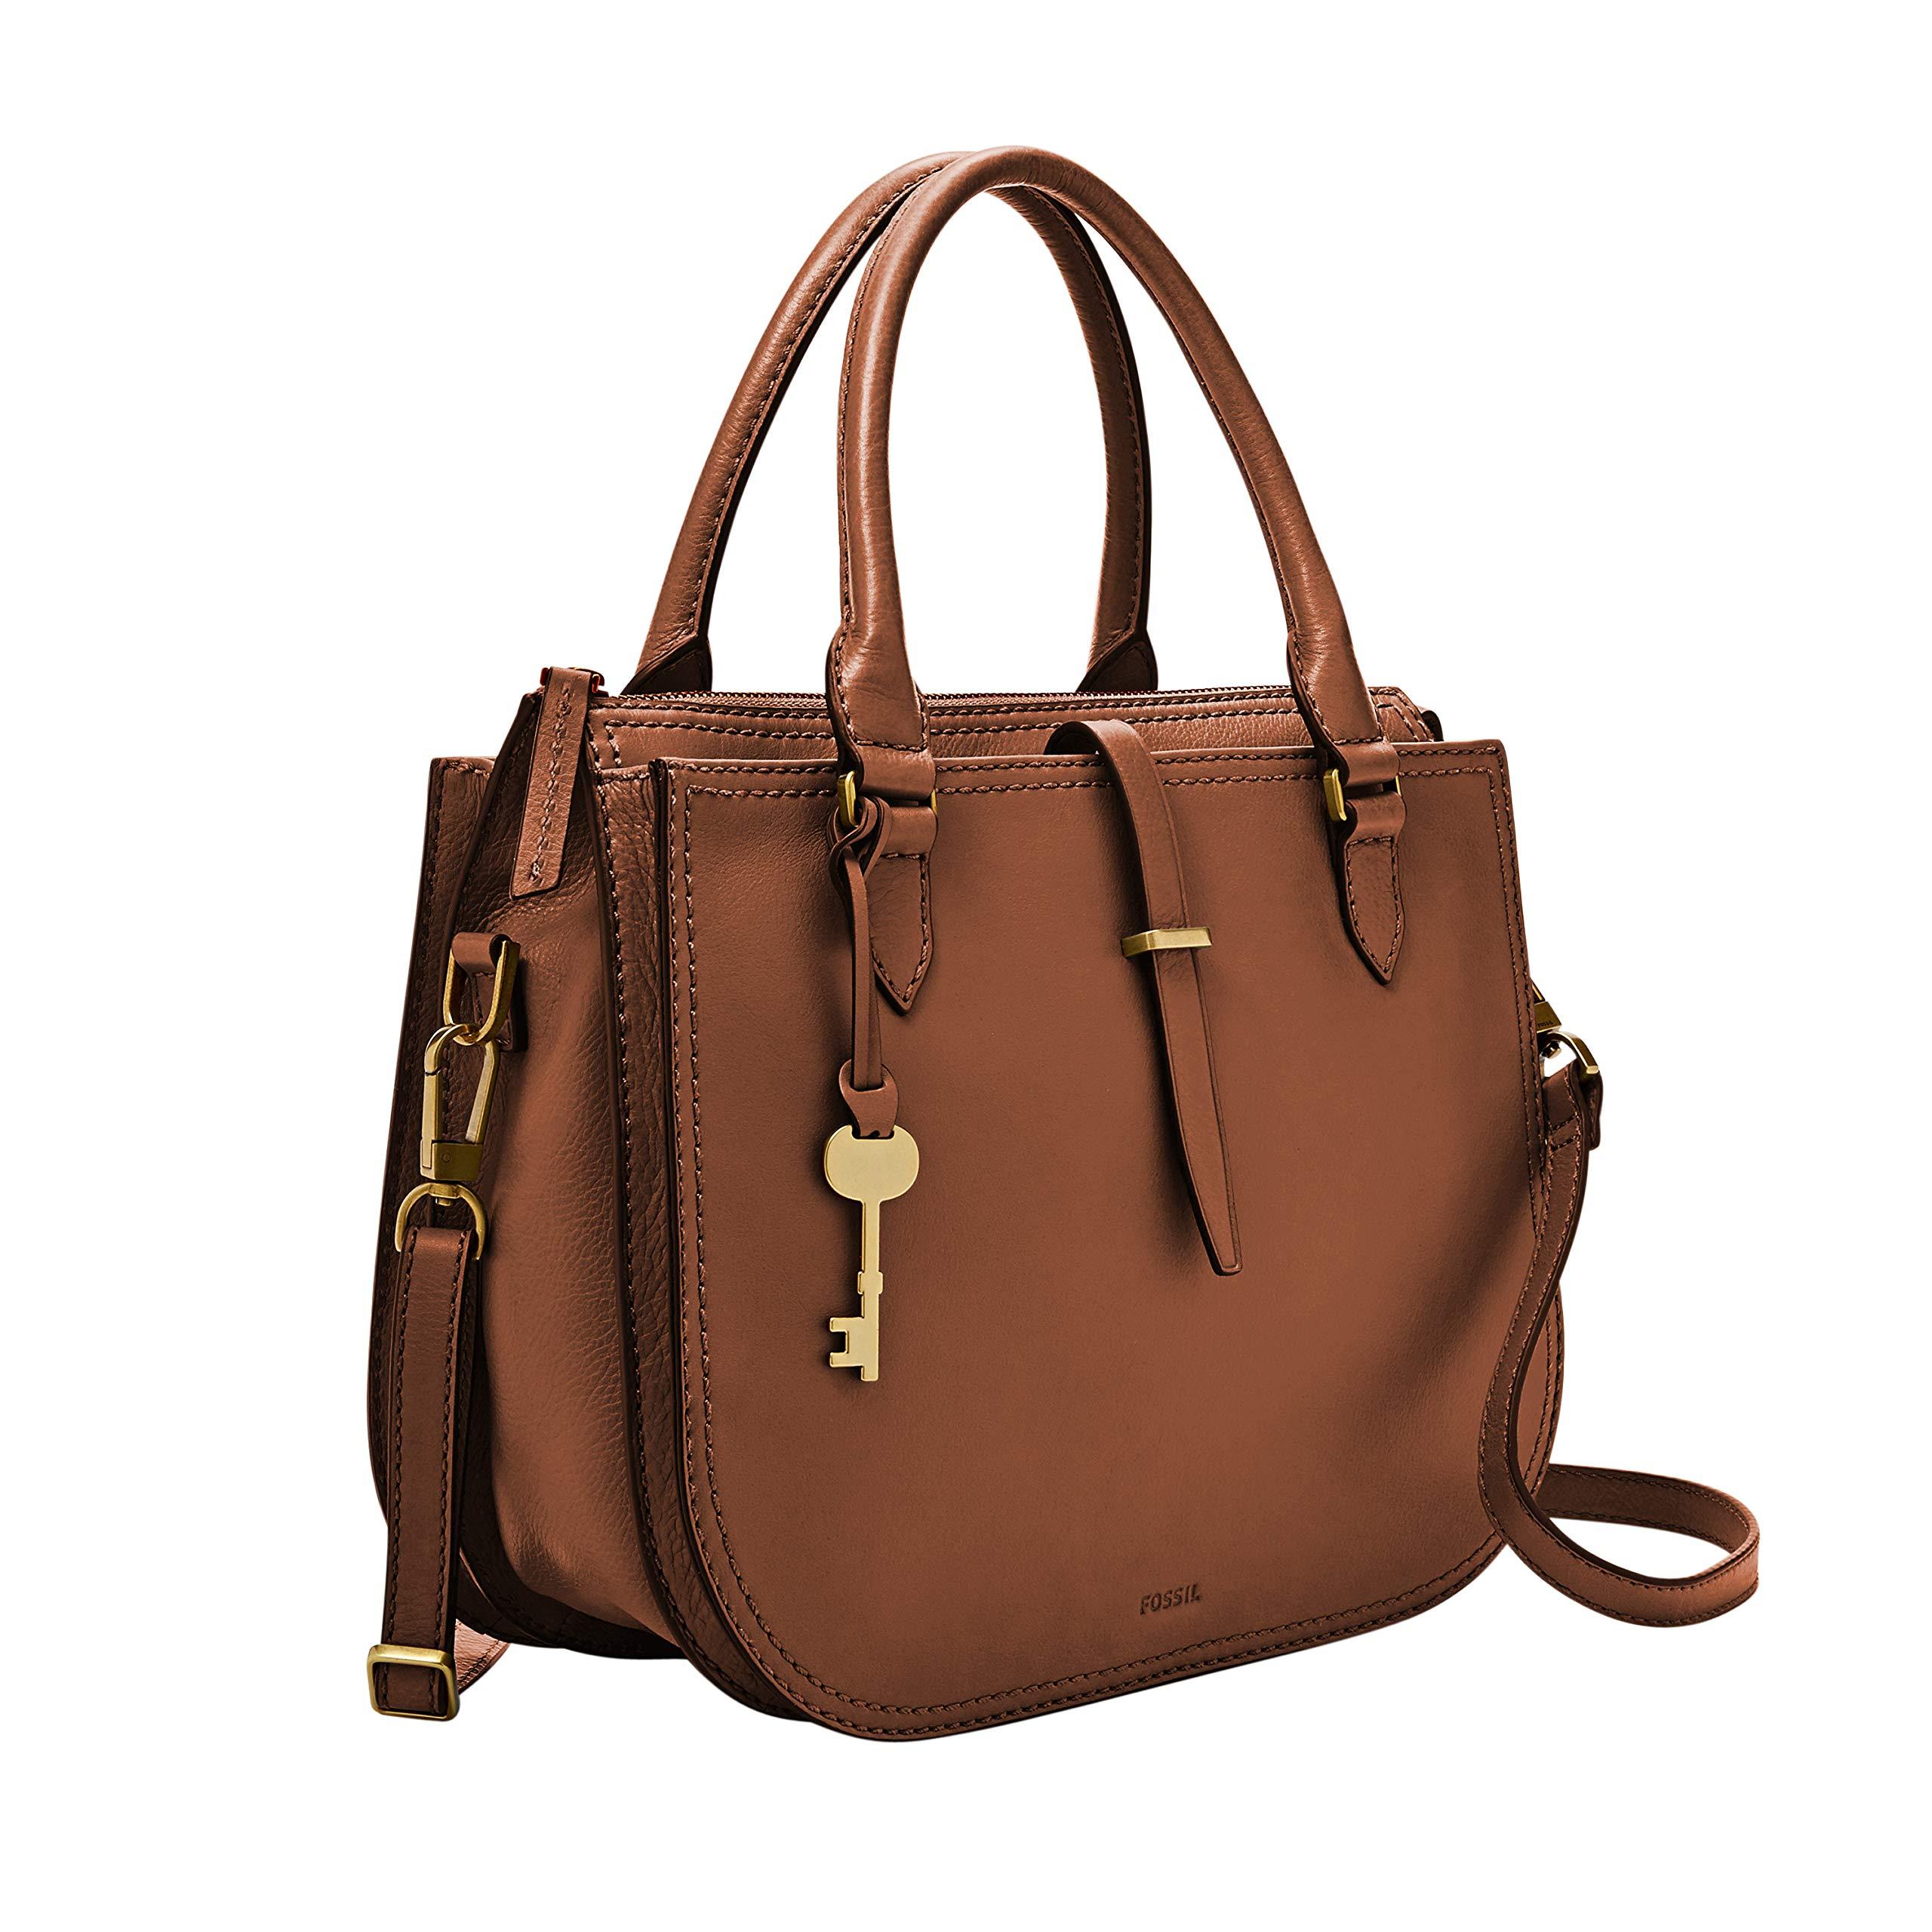 Buy the Komal's Passion Leather Satchel | GoodwillFinds